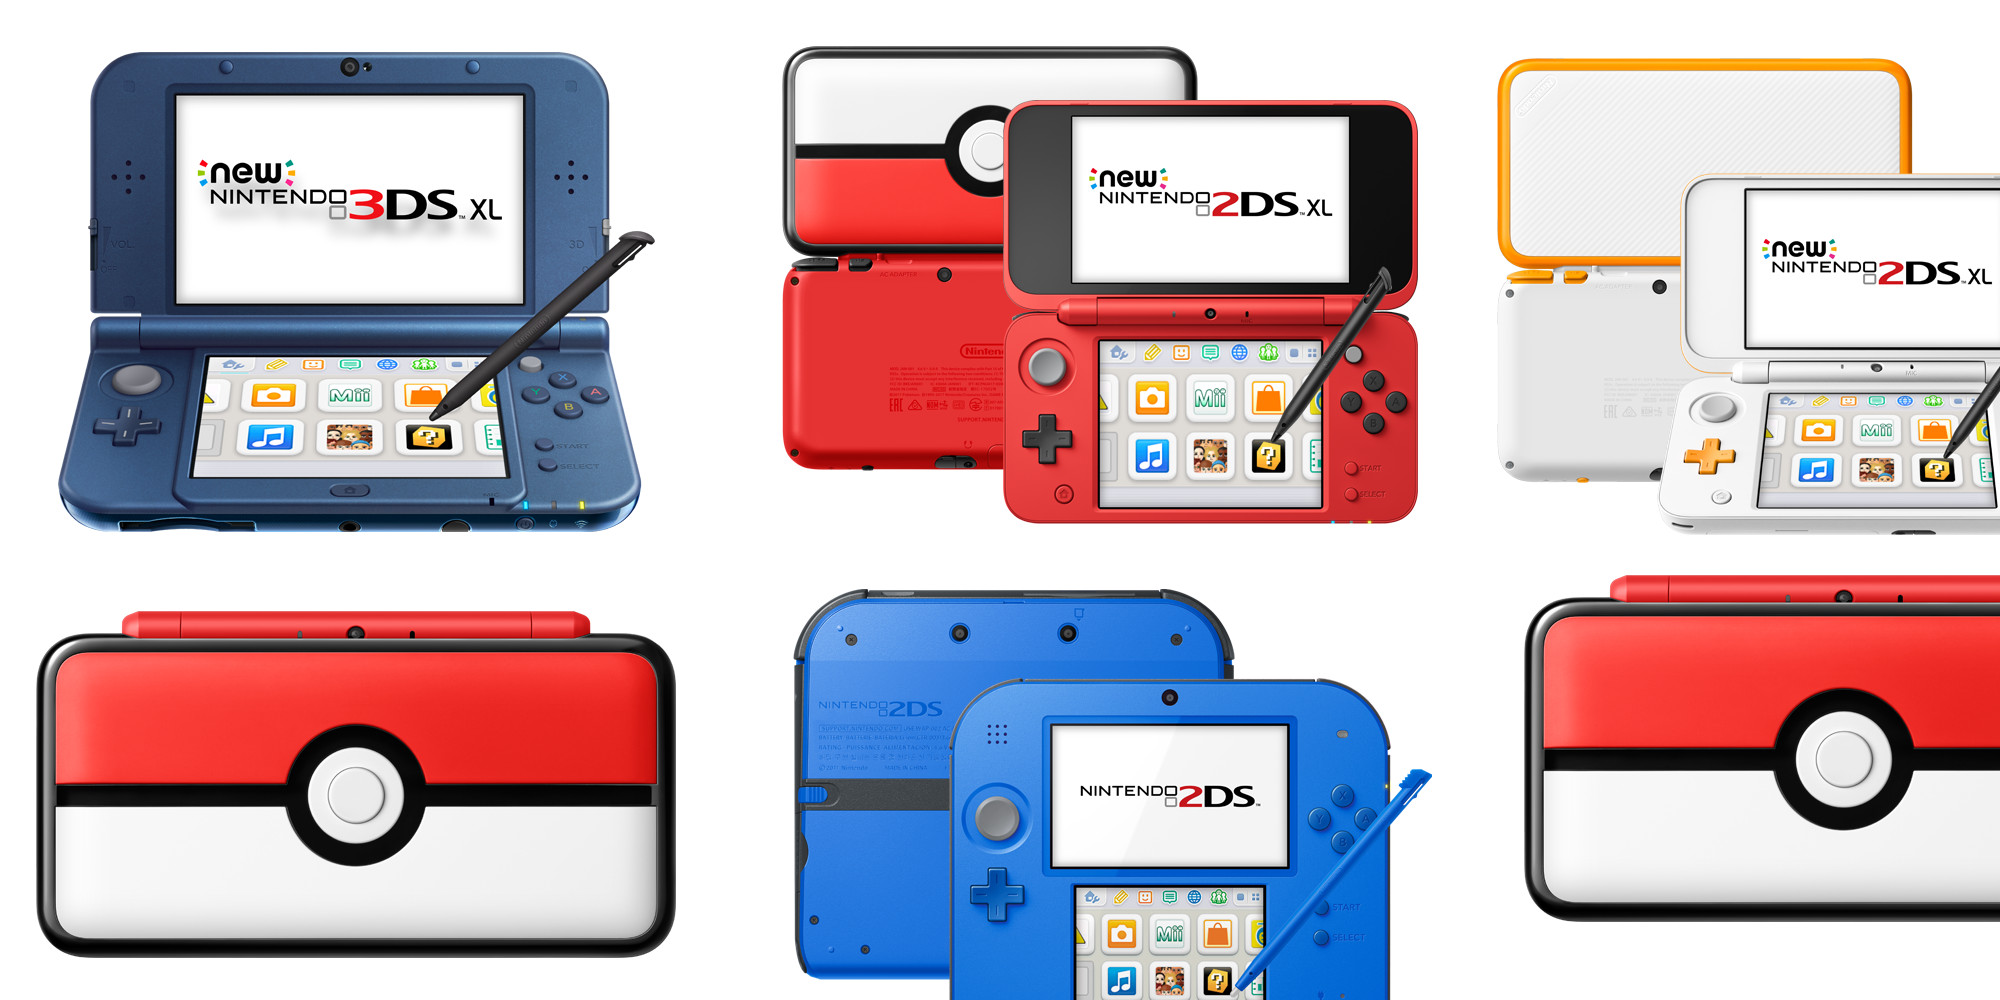 Nintendo to cease 3DS, Wii U eShop purchases next year 